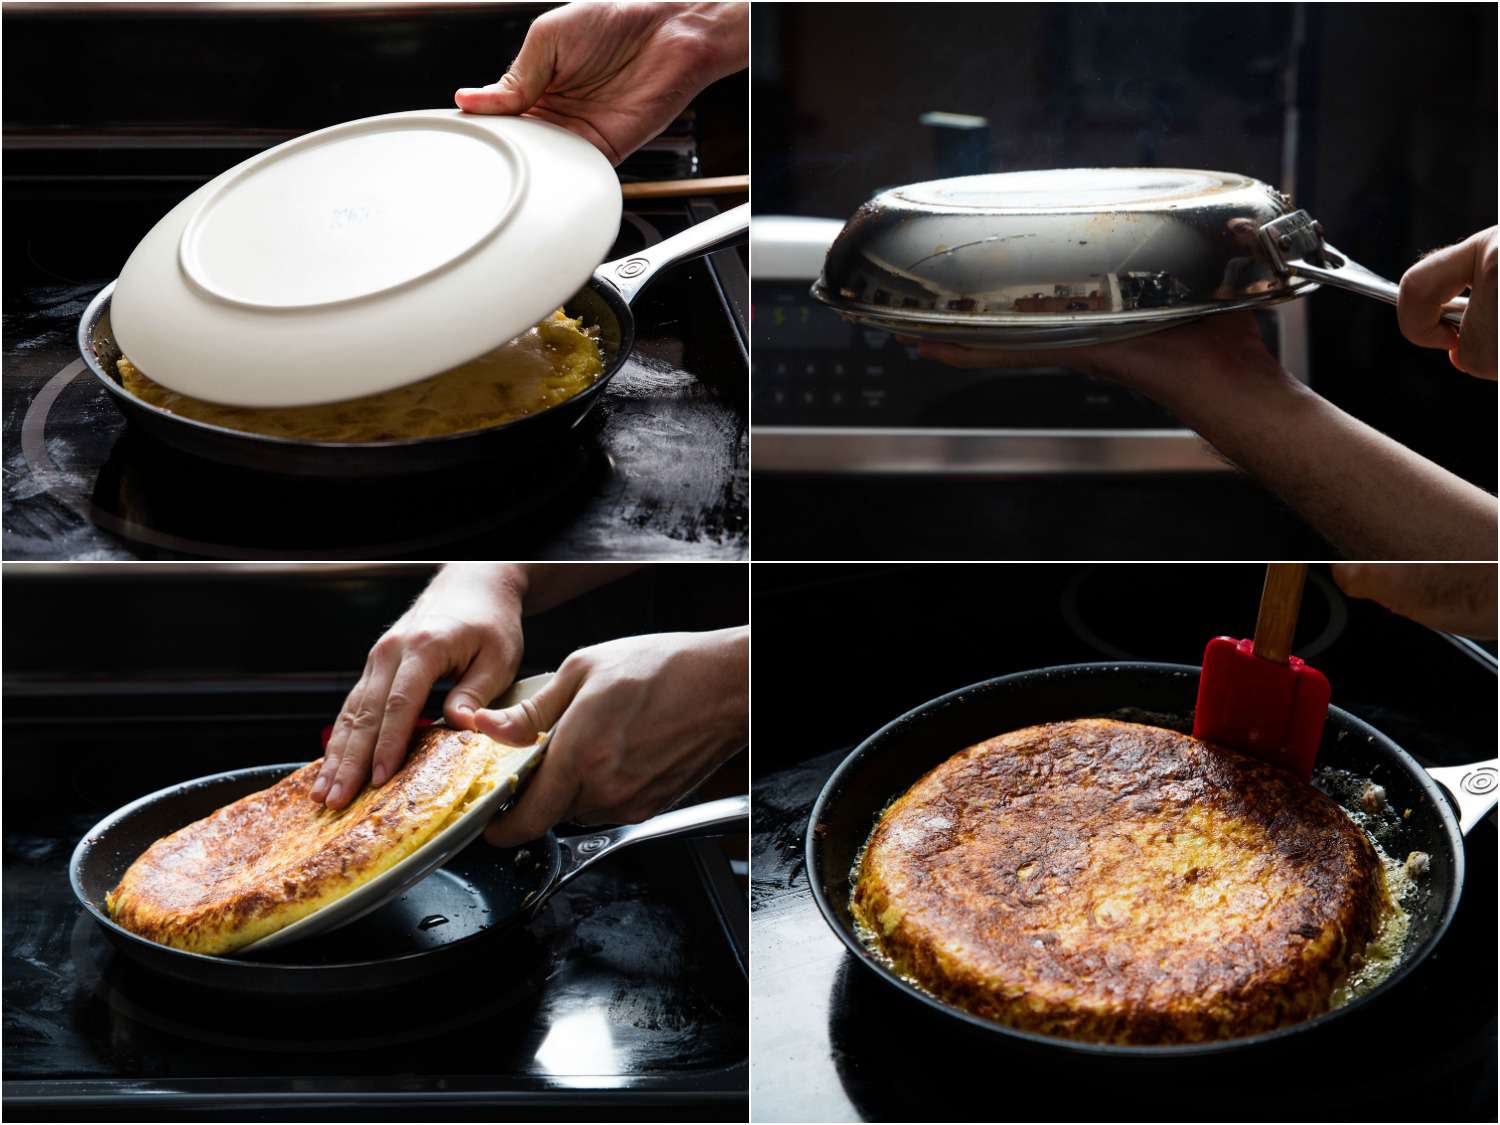 A collage of four images showing how to flip a tortilla española. Cover the tortilla with a plate, quickly flip the pan upside down so the tortilla is on the plate. Return the skillet to the heat and slide the tortilla in. Reshape the edges with a silicone spatula.